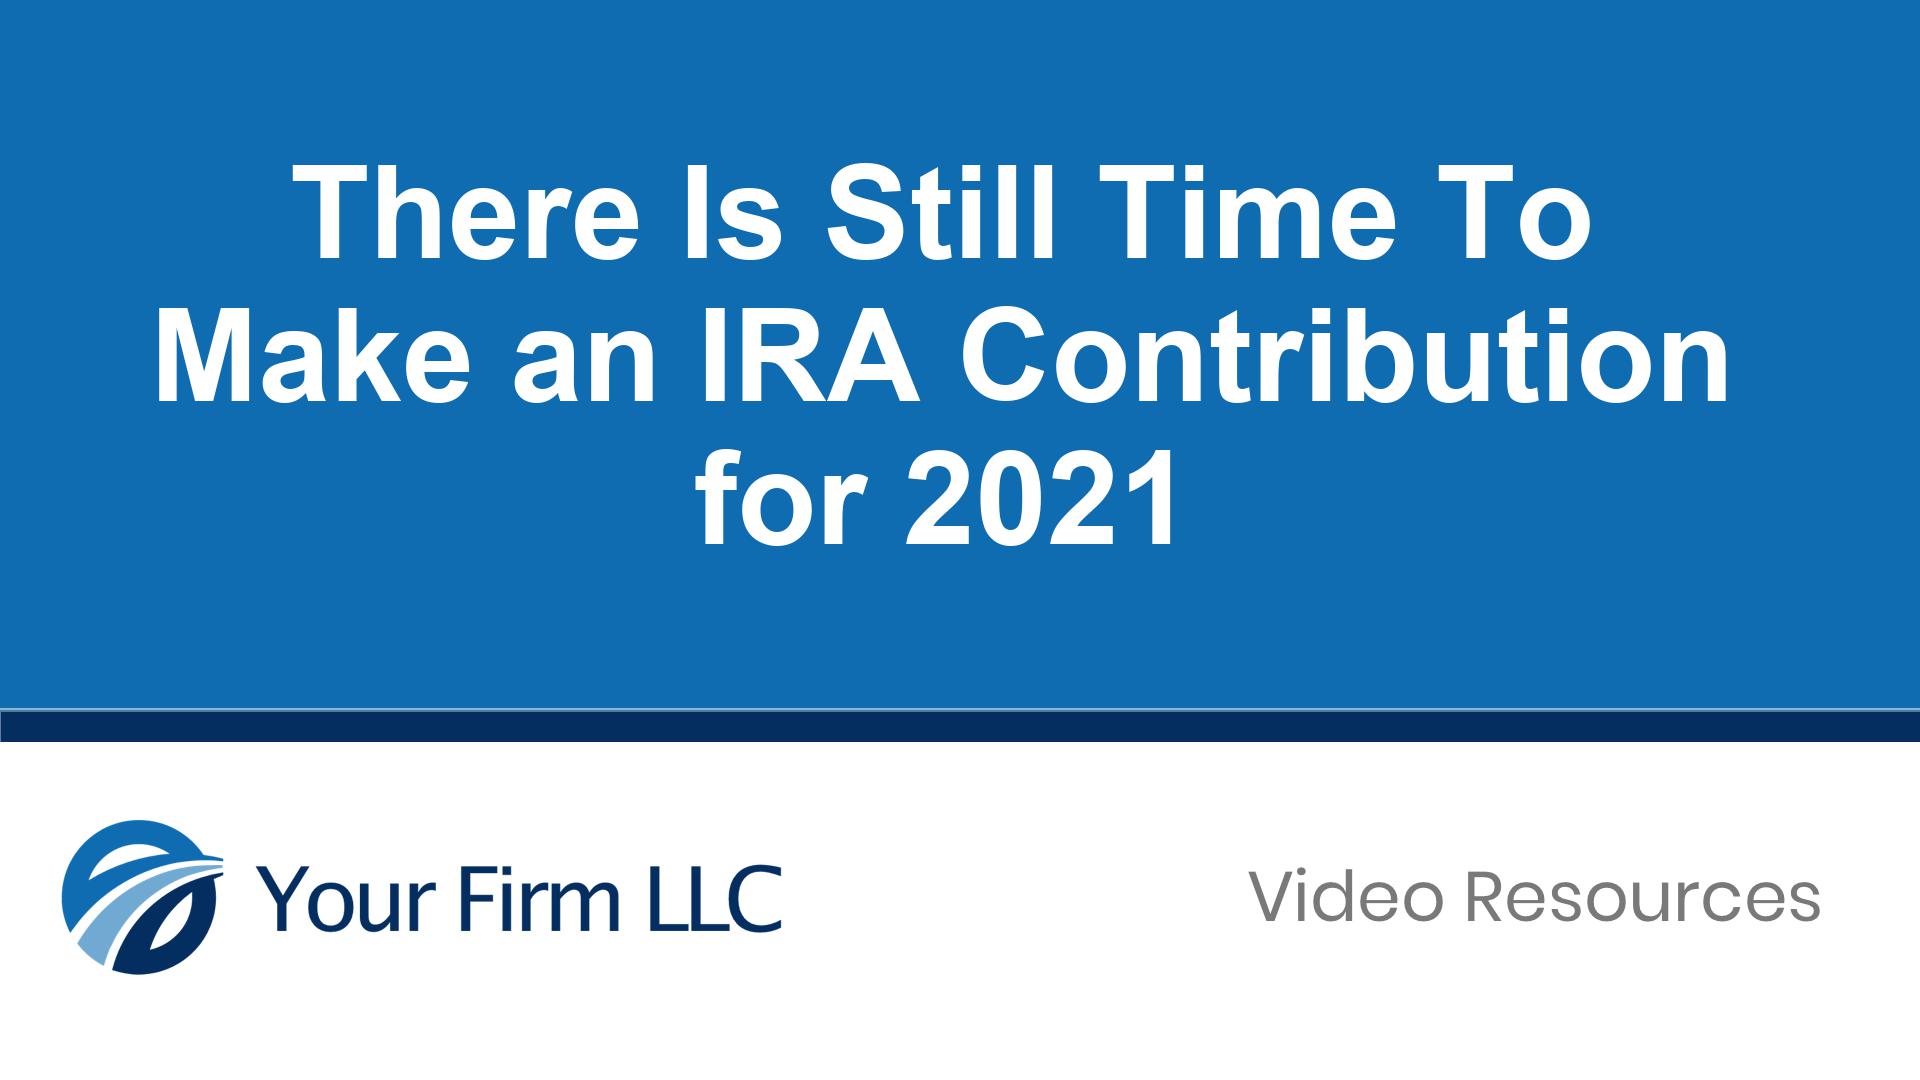 There Is Still Time To Make an IRA Contribution for 2021